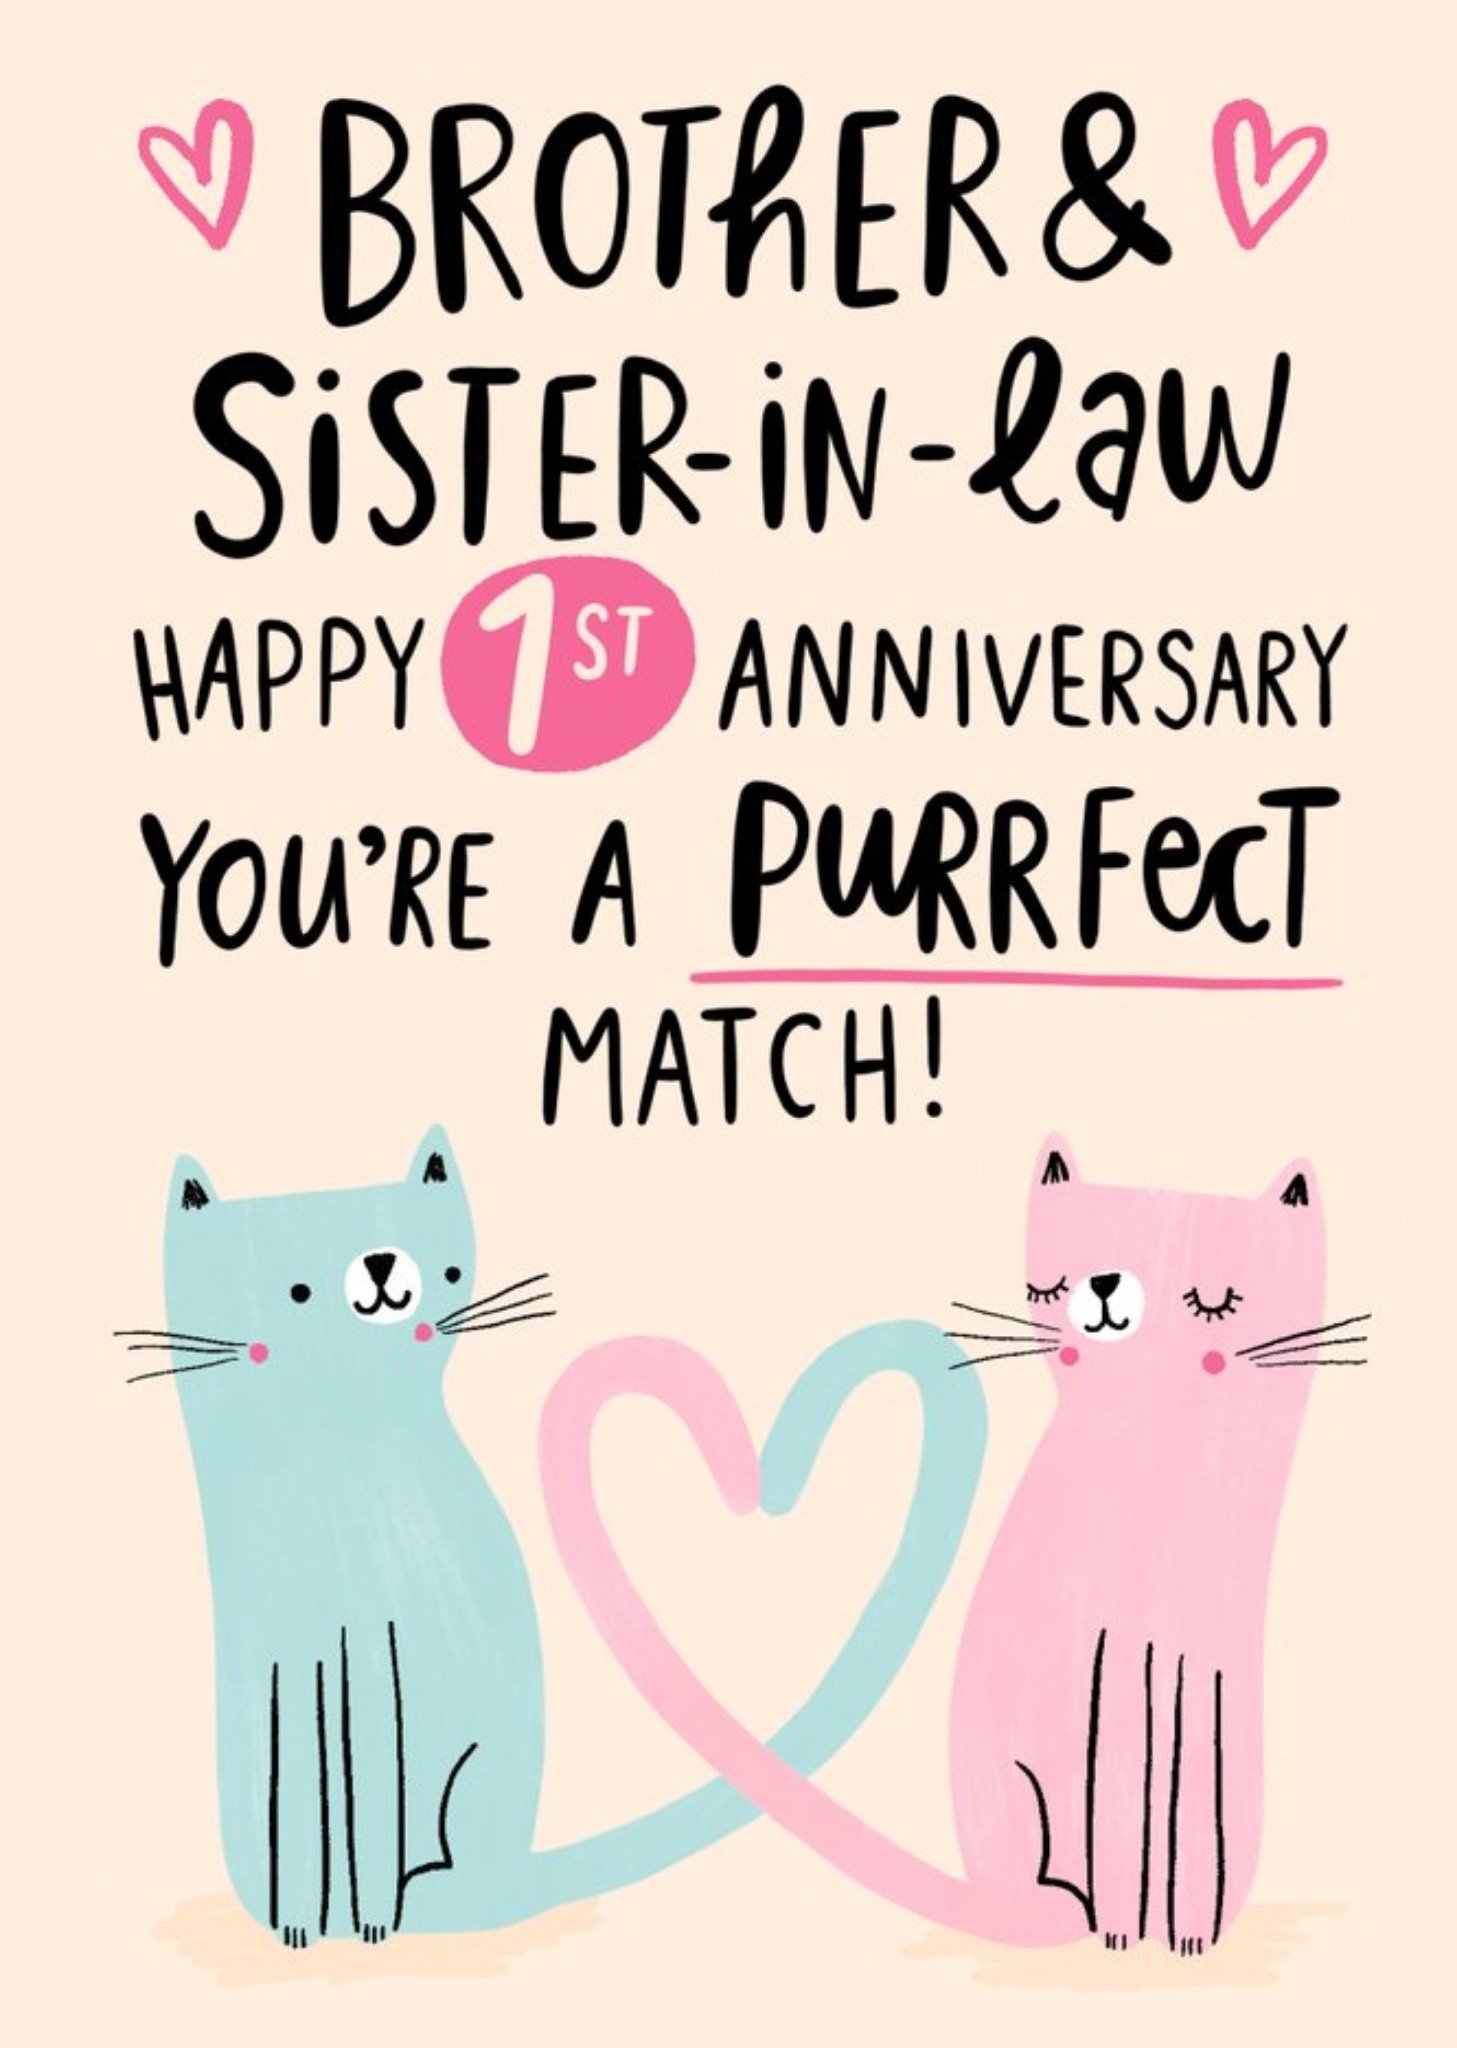 Moonpig Illustration Of Two Cats Brother And Sister In Law First Anniversary Card, Large